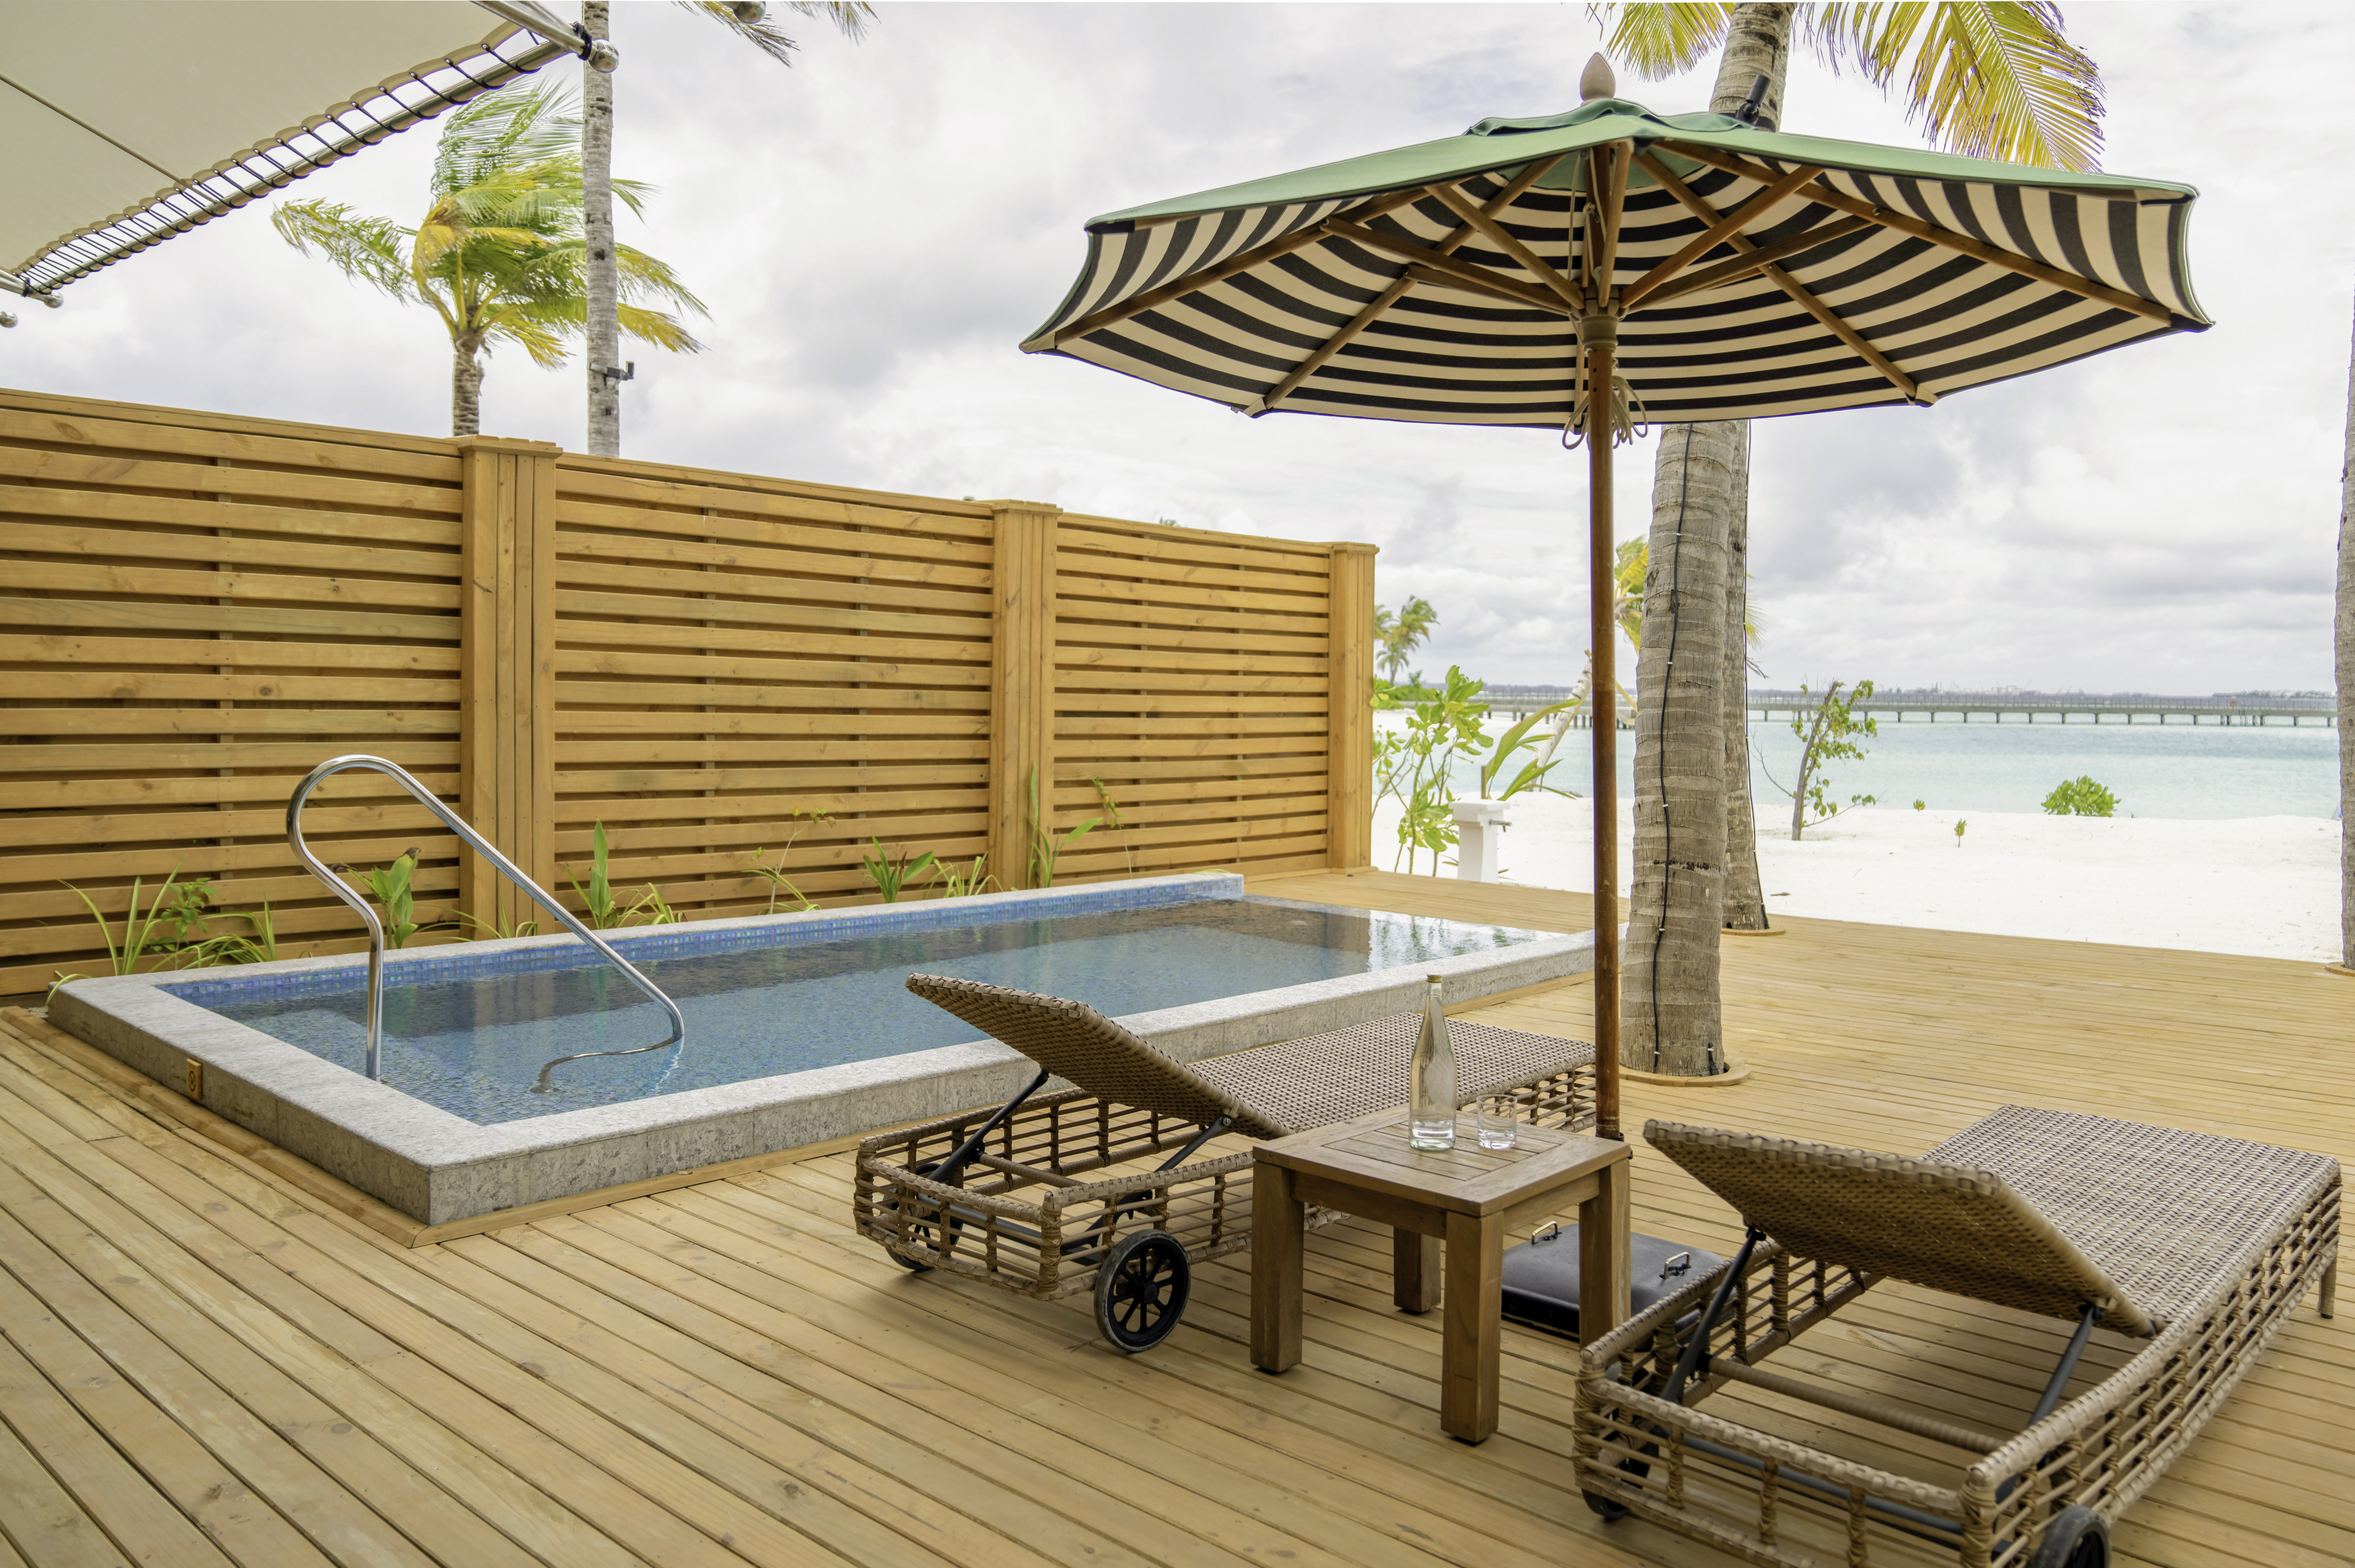 Outdoor Pool Area with Lounge Chairs under an Umbrella and View of the Beach